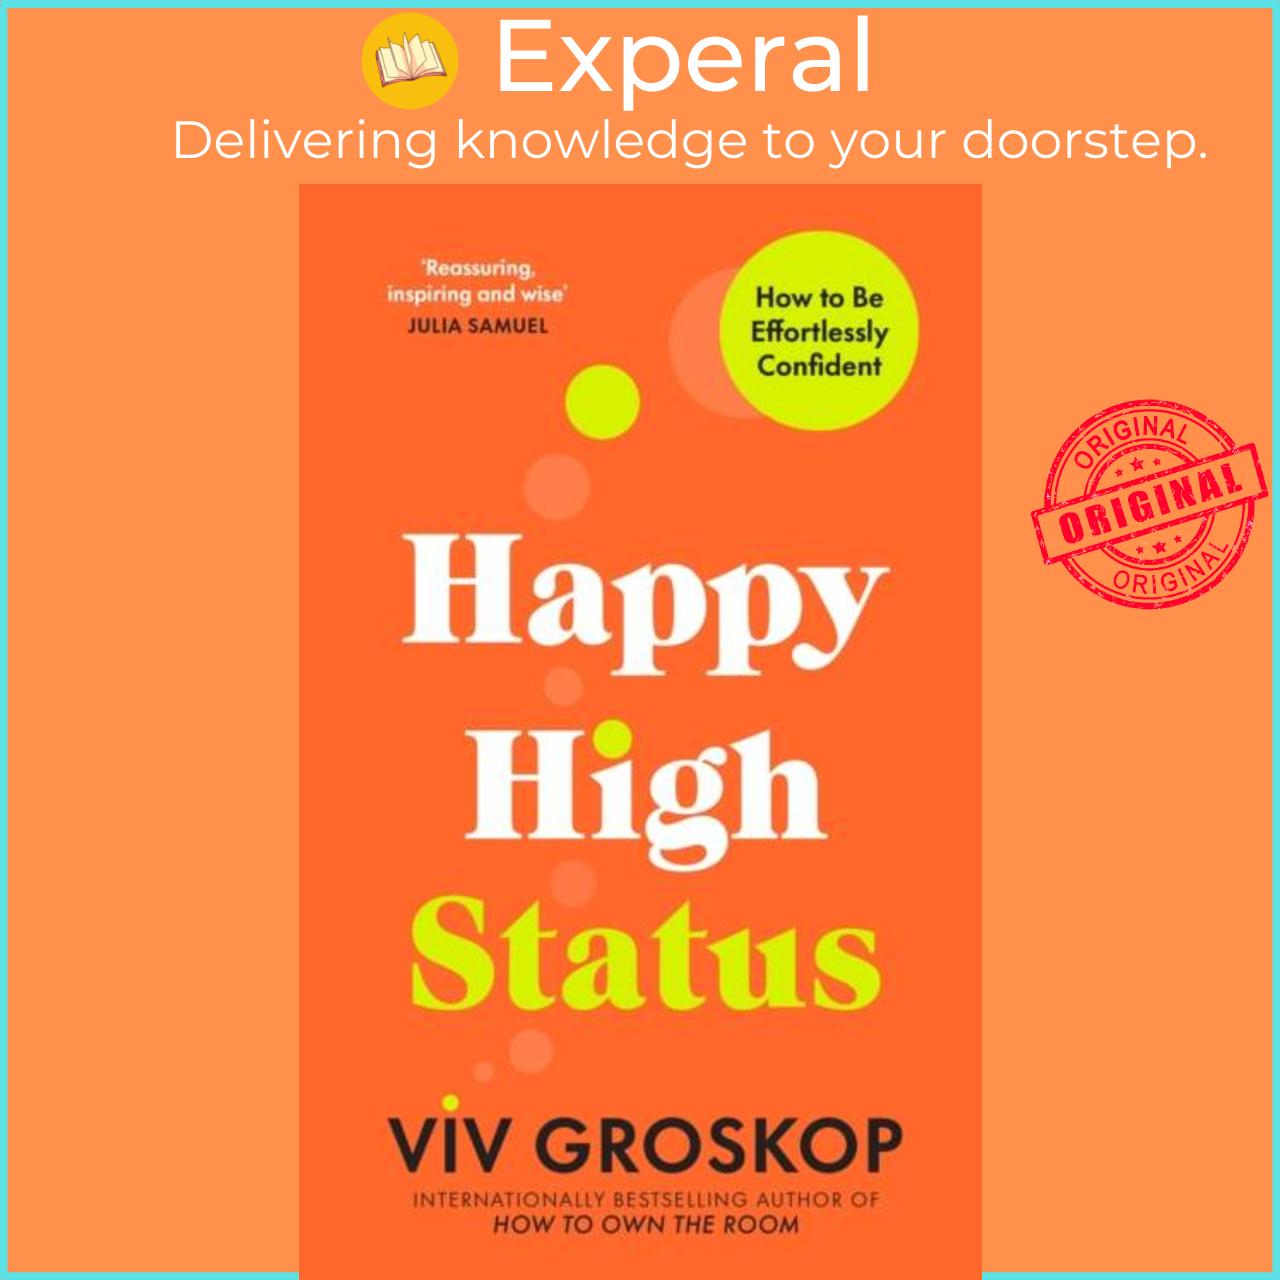 Sách - Happy High Status - How to Be Effortlessly Confident by Viv Groskop (UK edition, hardcover)